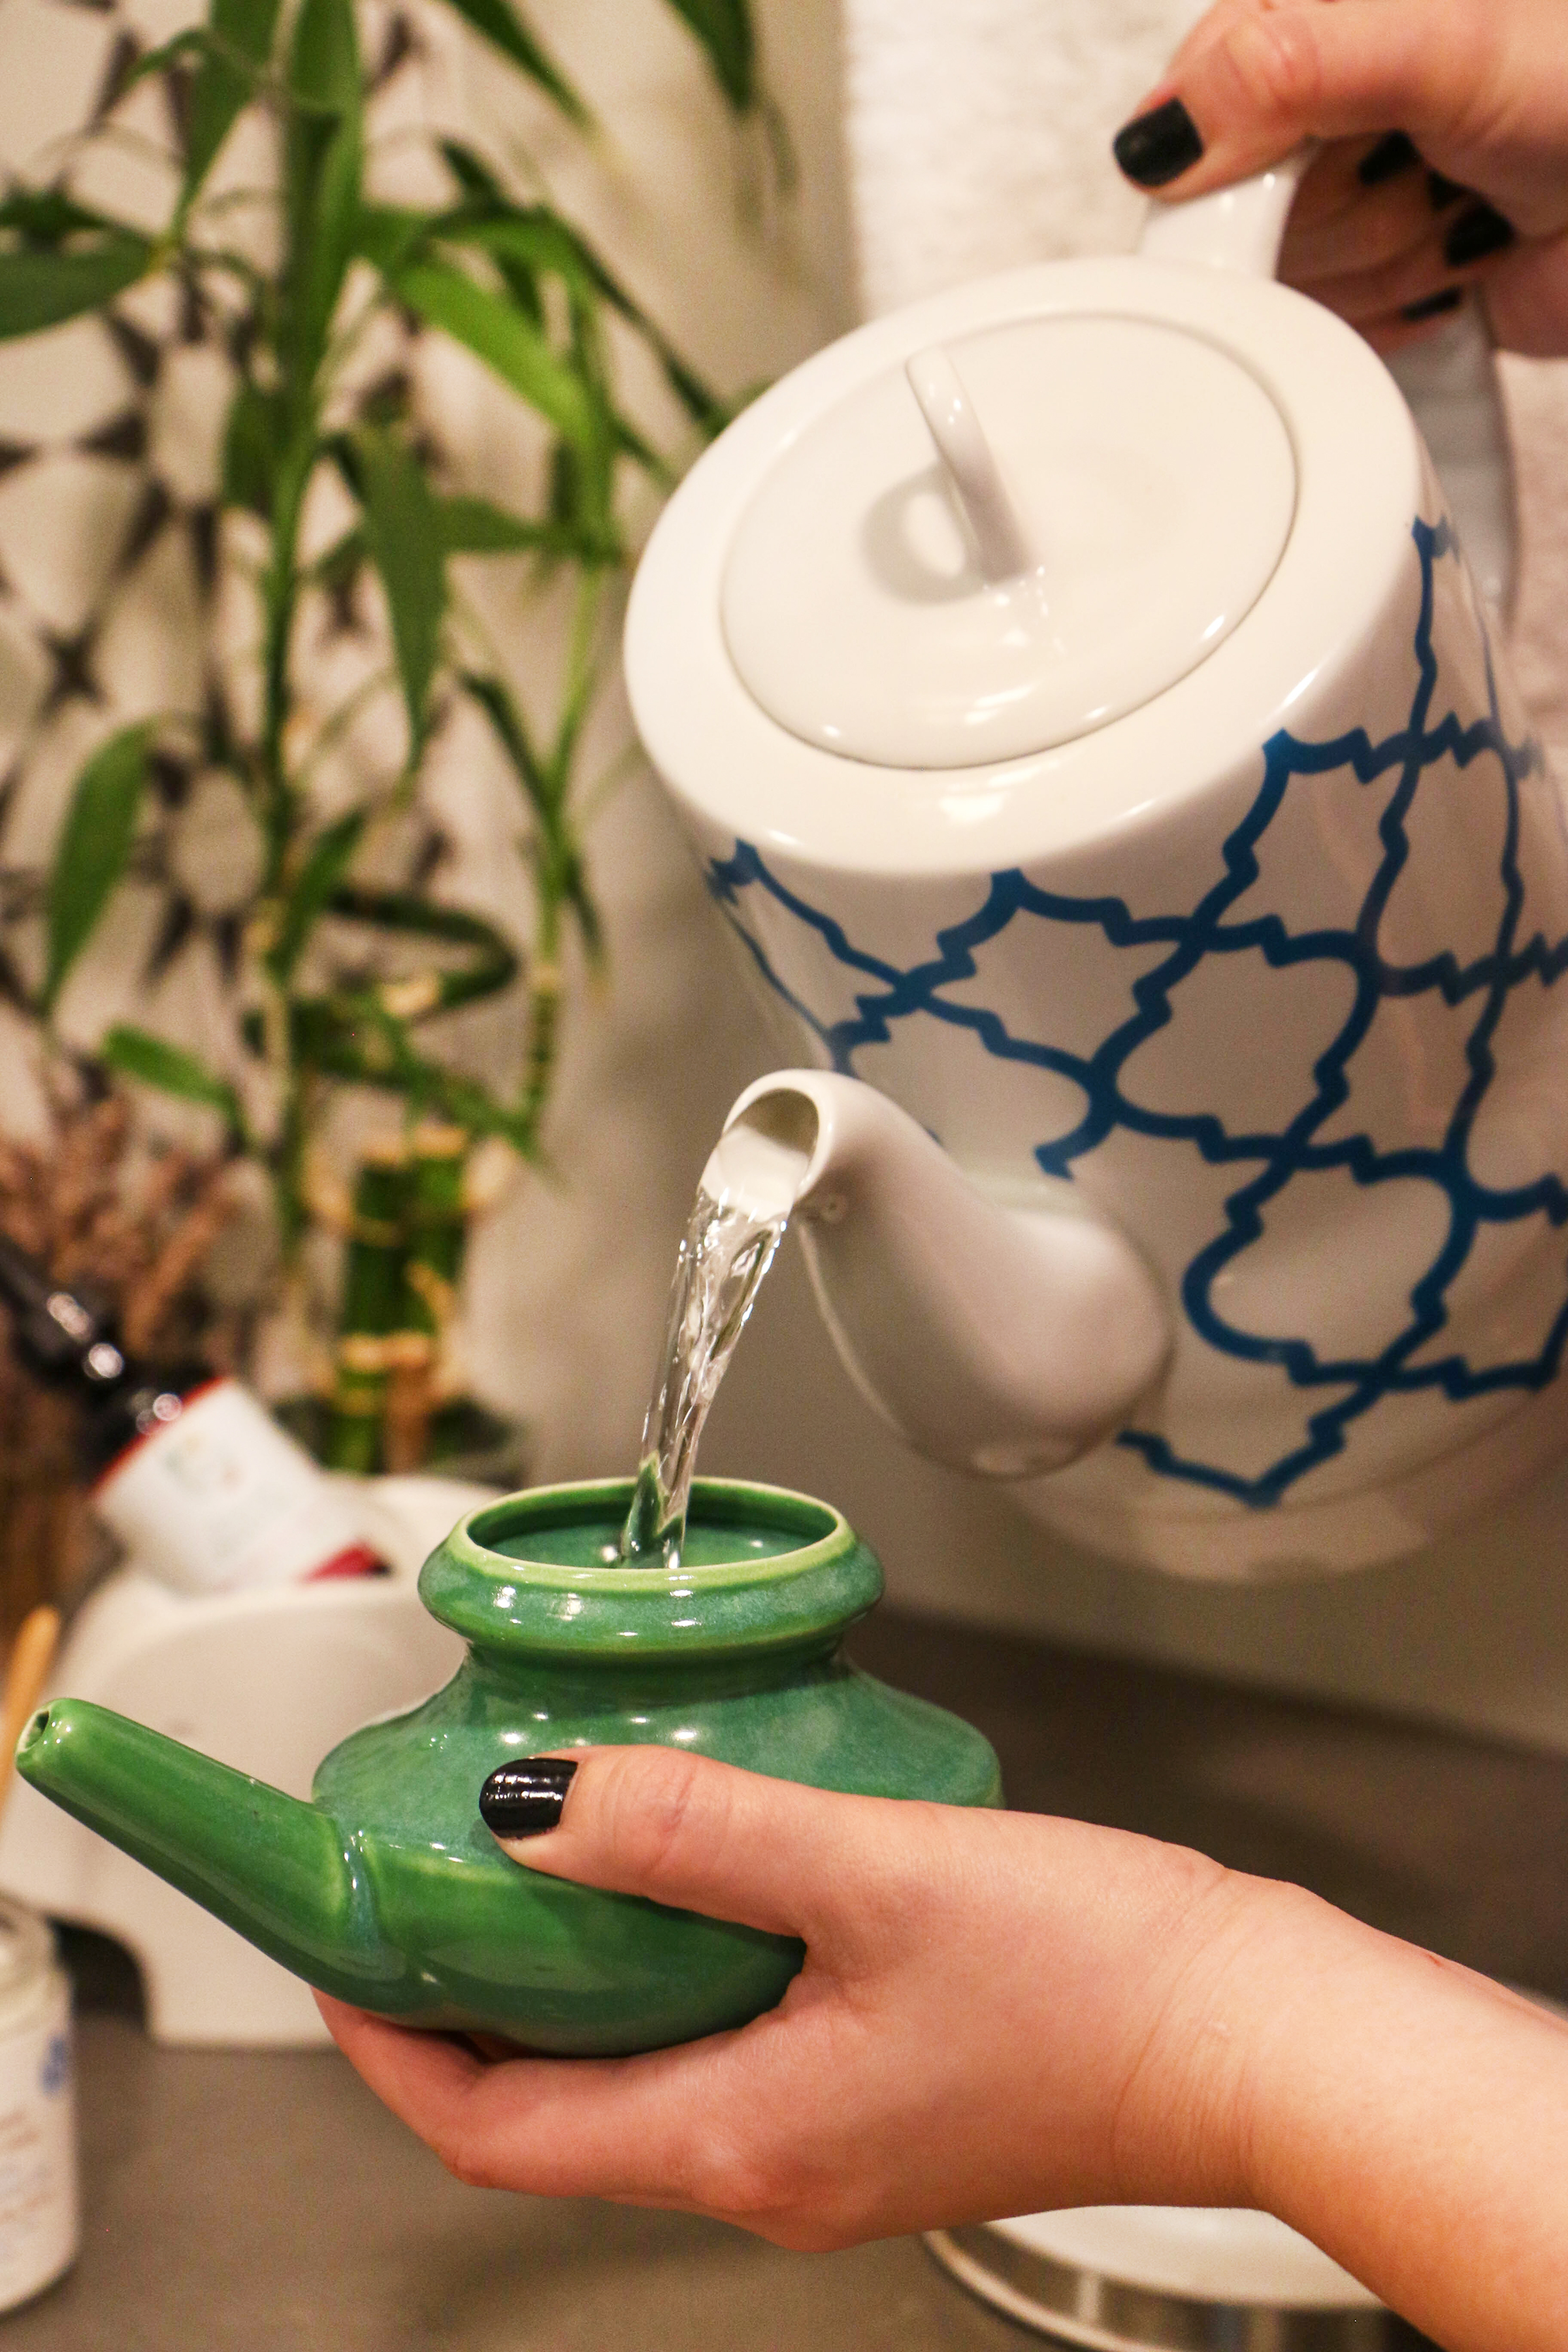 boiled-cooled-water-being-poured-from-white-and-blue-ceramic-kettle-into-green-ceramic-neti-pot